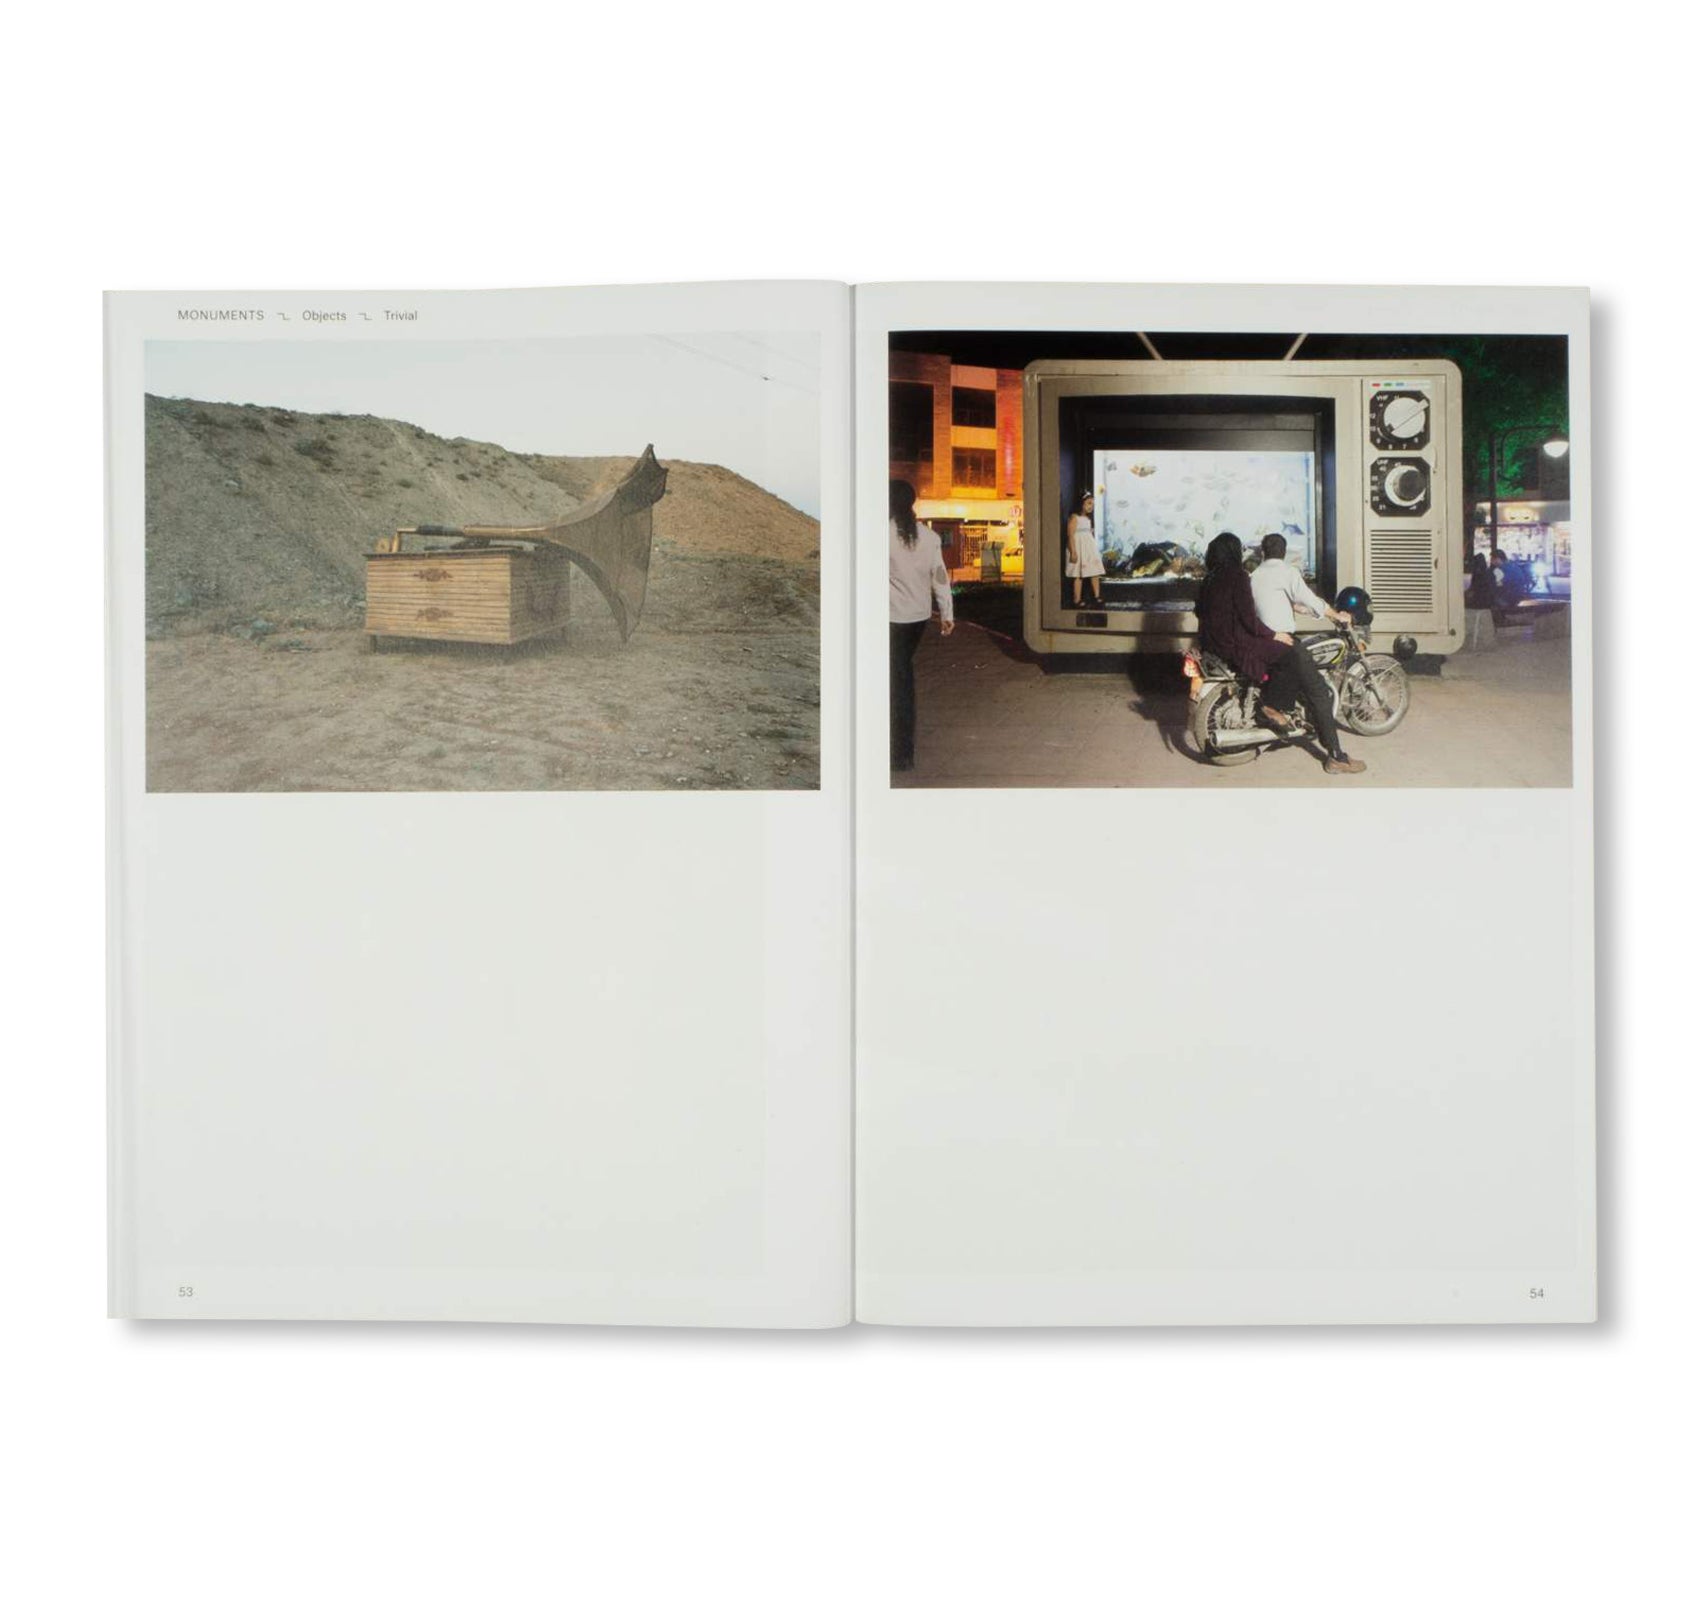 IRAN / A PICTURE BOOK by Oliver Hartung